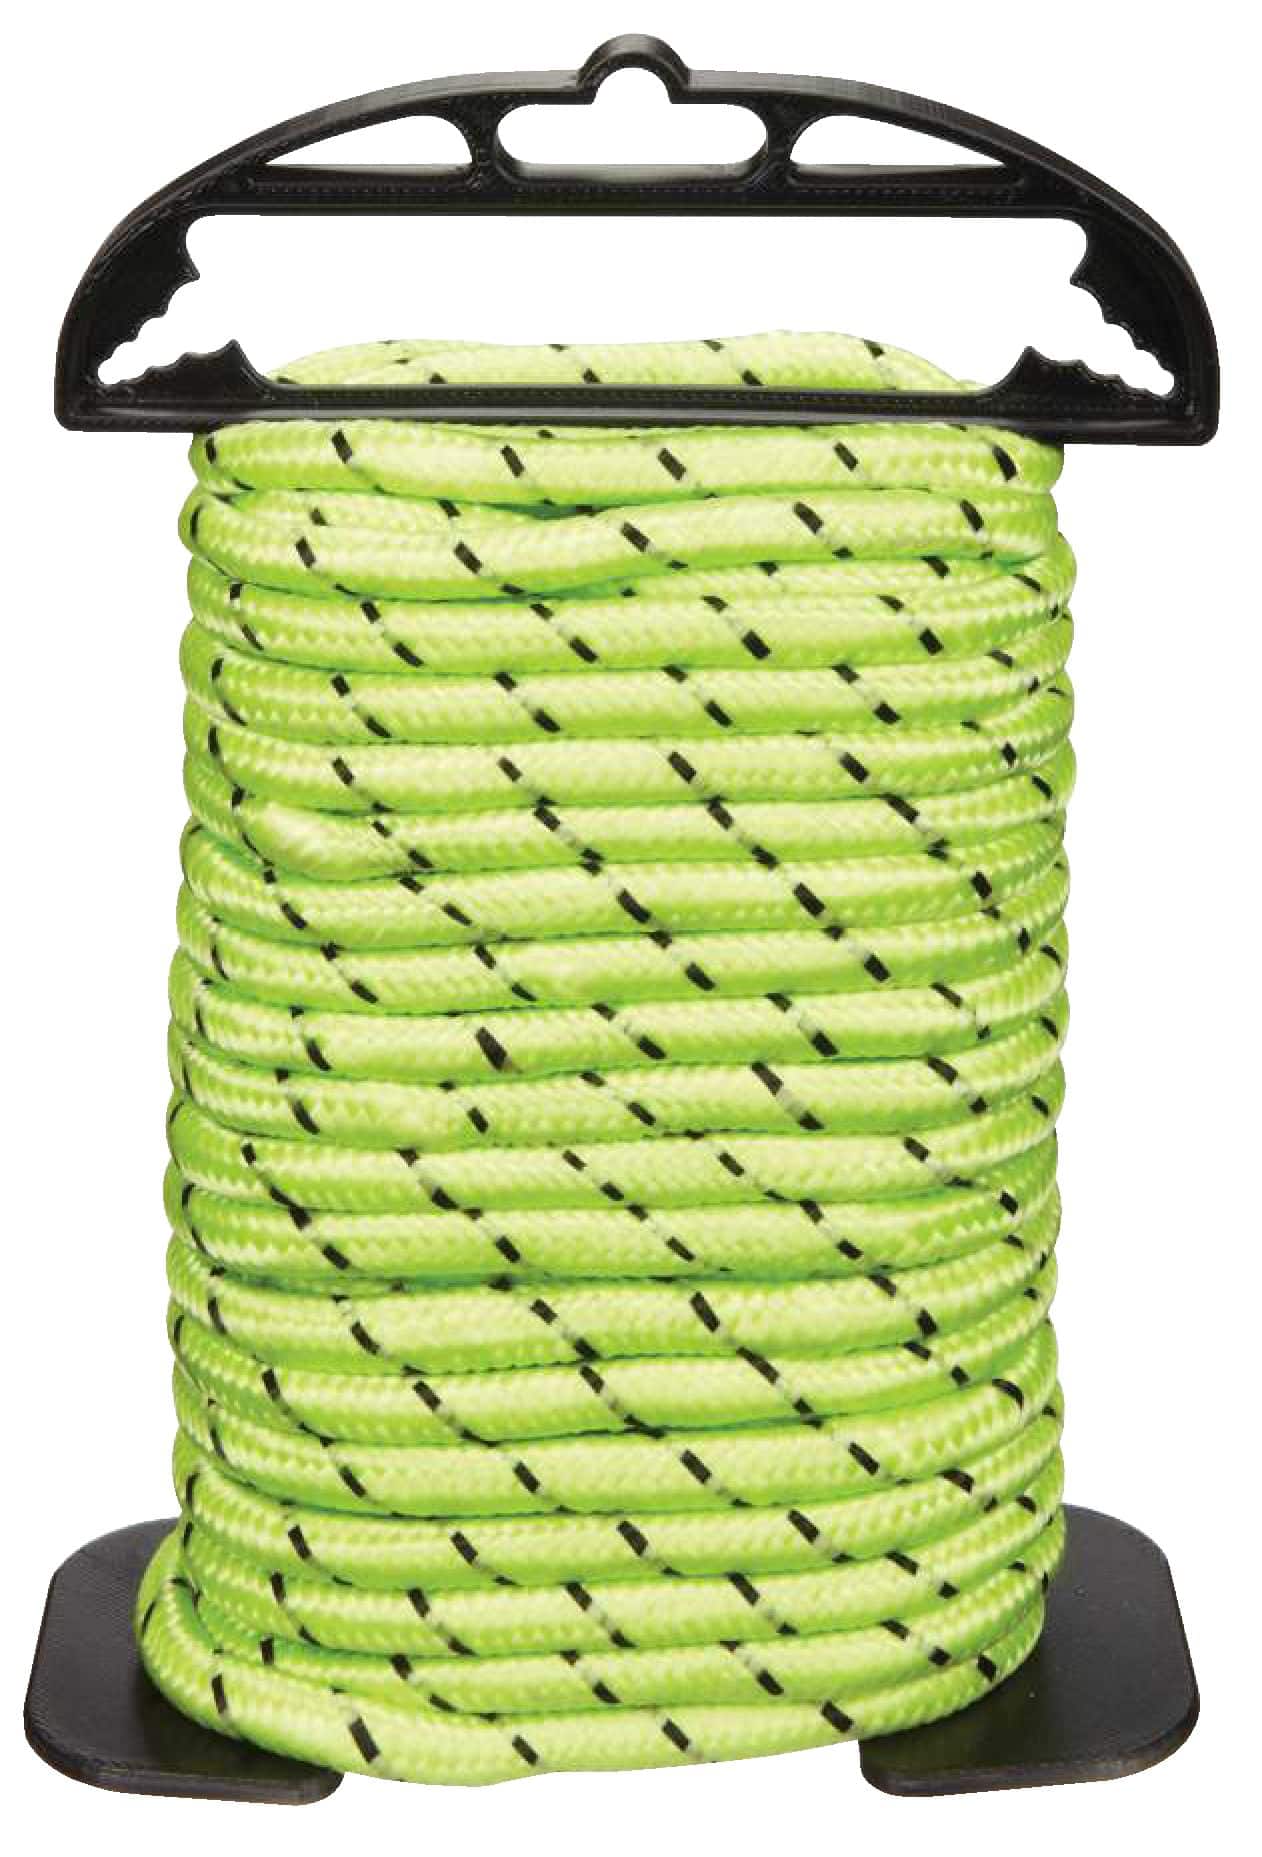 https://media-www.canadiantire.ca/product/fixing/hardware/general-hardware/0618537/3-8-glow-in-the-dark-rope-with-holder-16bfc5af-0a98-4d82-968c-1599e134e9de-jpgrendition.jpg